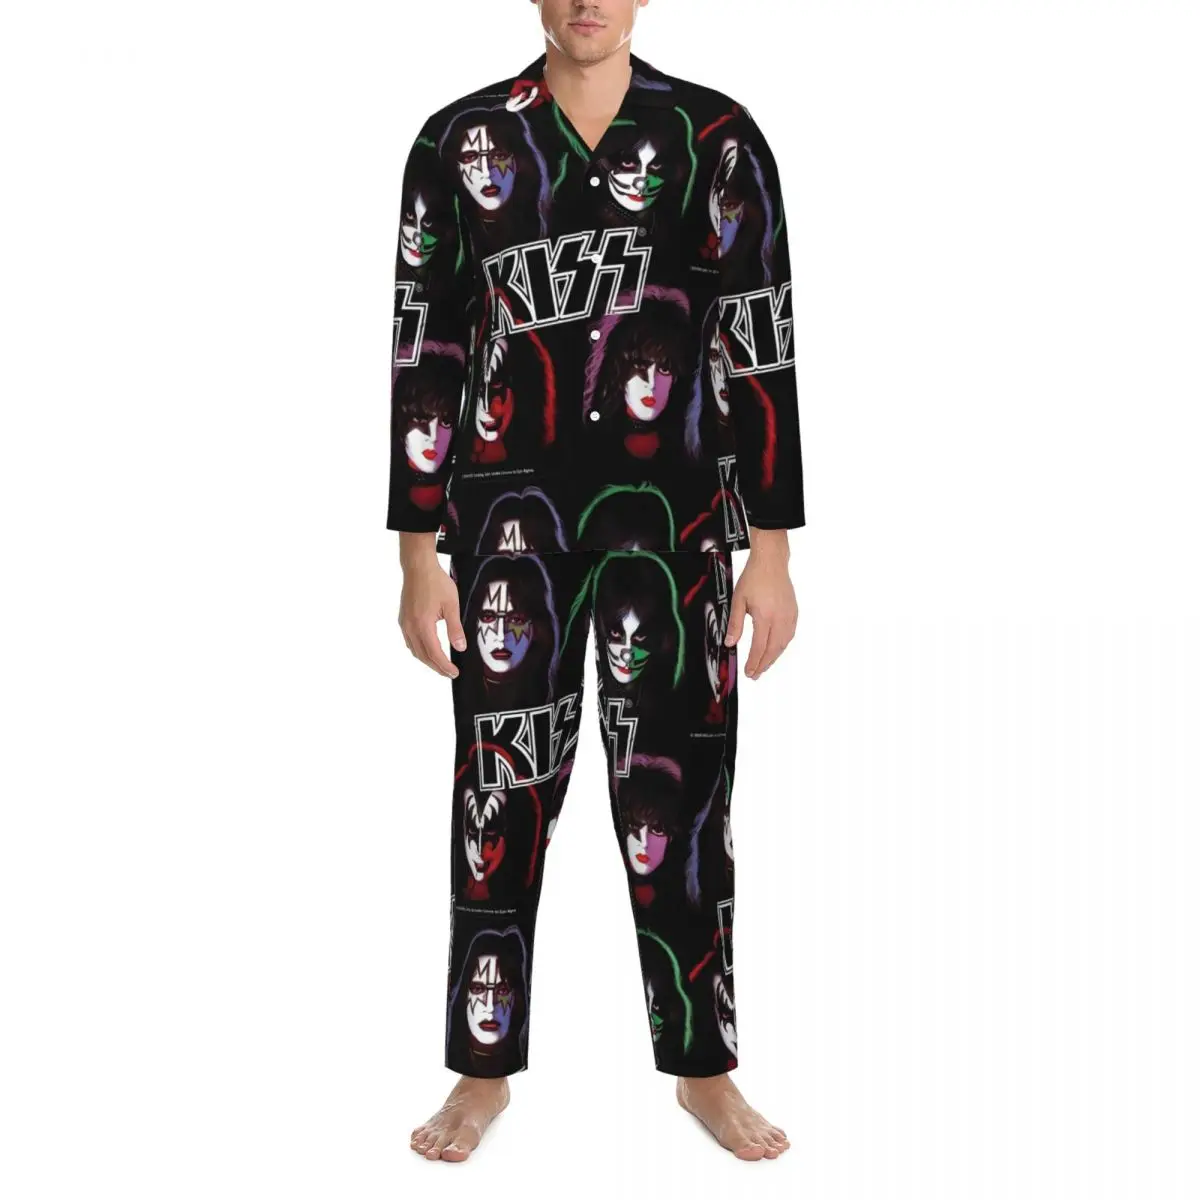 

Kiss Band Group Pajamas Set Autumn Rock Band Cute Soft Bedroom Sleepwear Unisex 2 Piece Loose Oversize Home Suit Birthday Gift